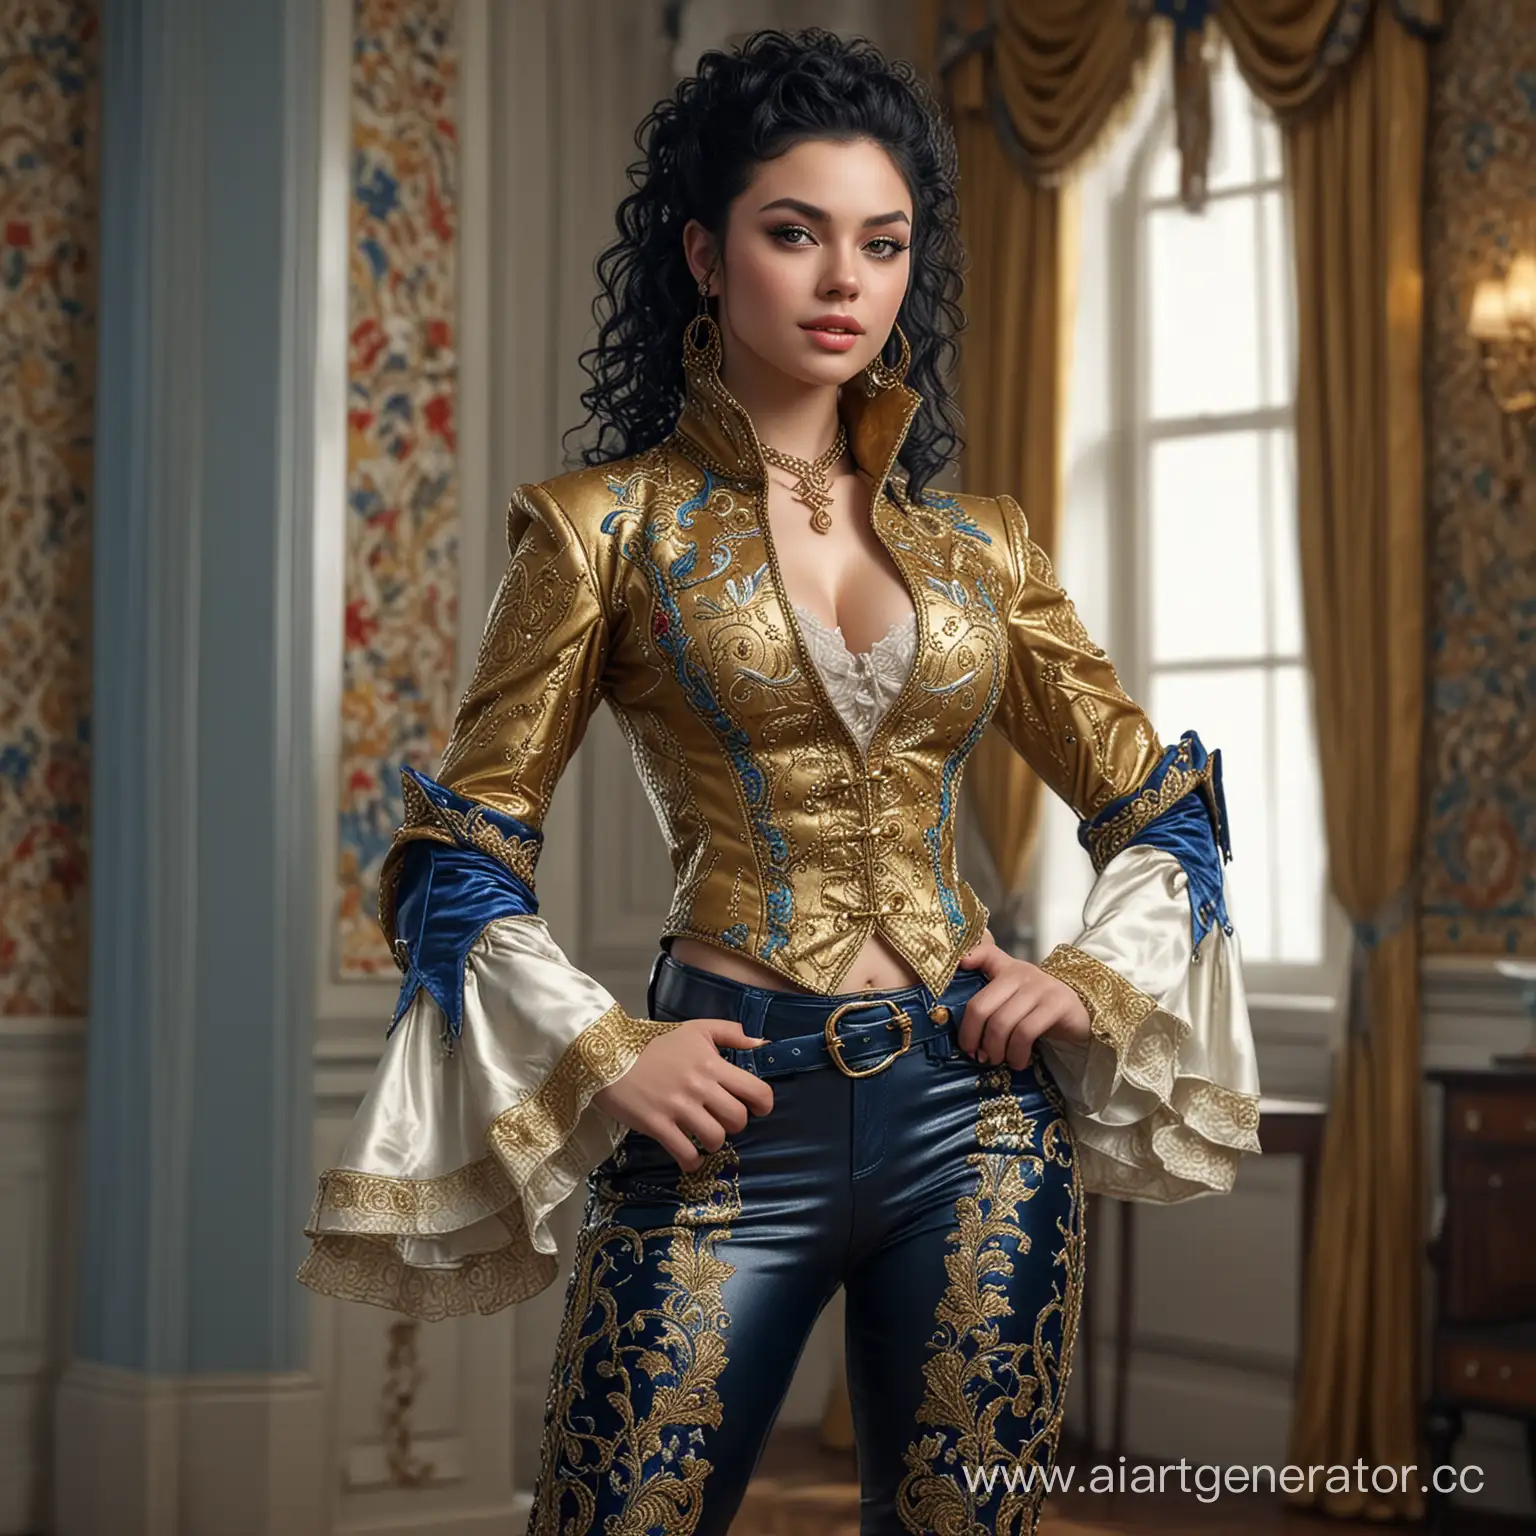 Glamorous-CurlyHaired-Beauty-in-Embroidered-Gold-Doublet-and-Leather-Pants